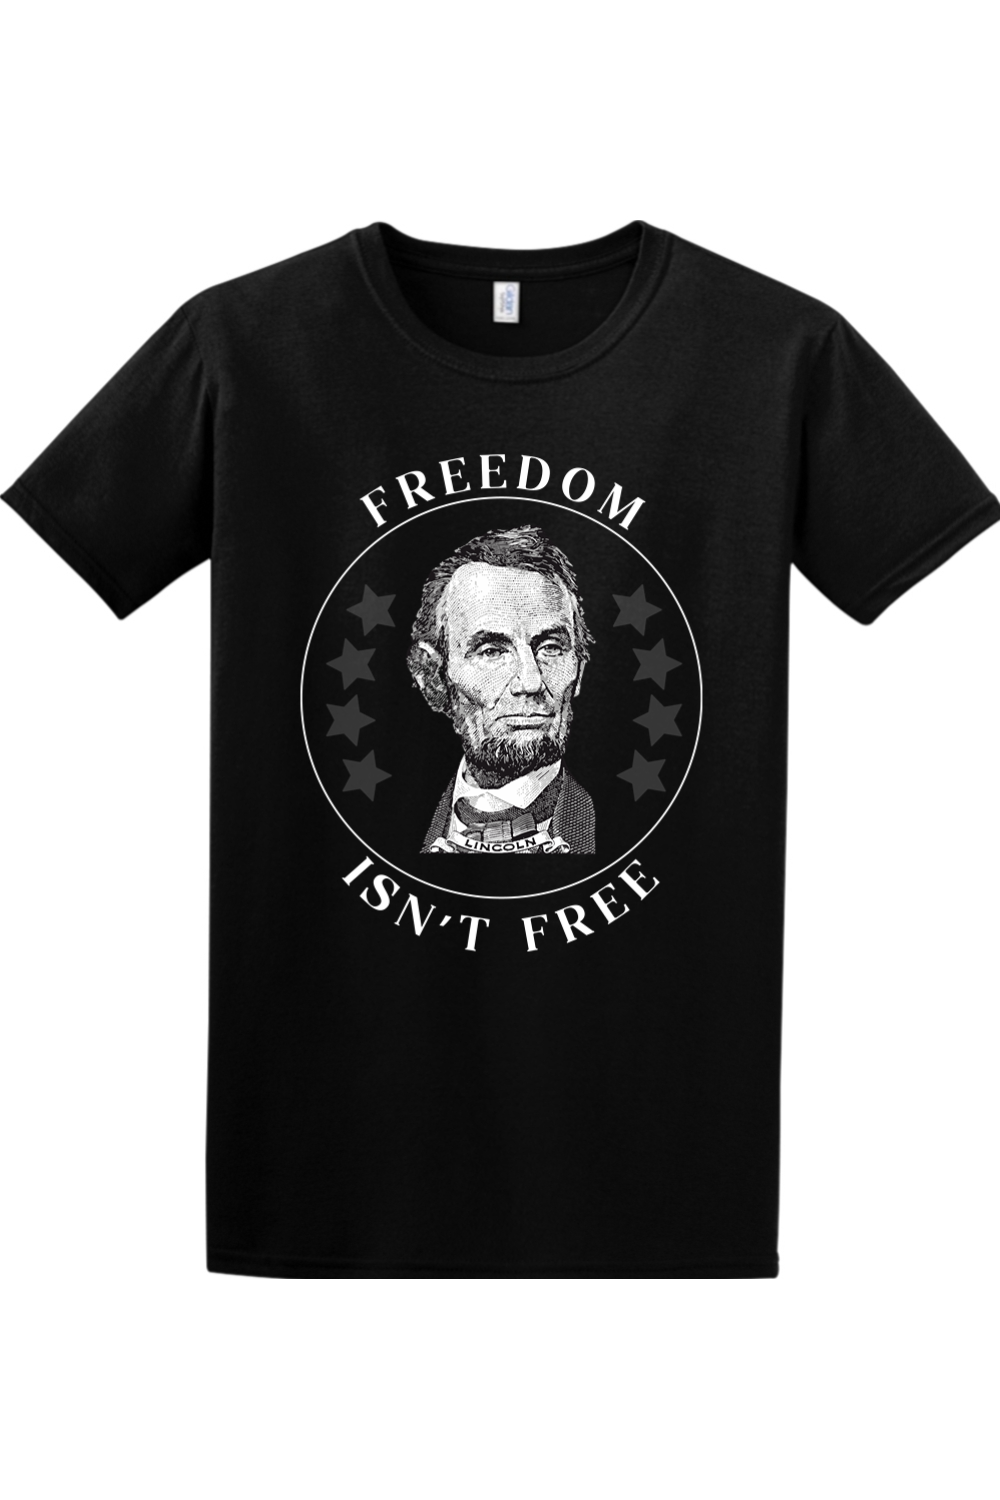 Lincoln - Freedom Isn't Free